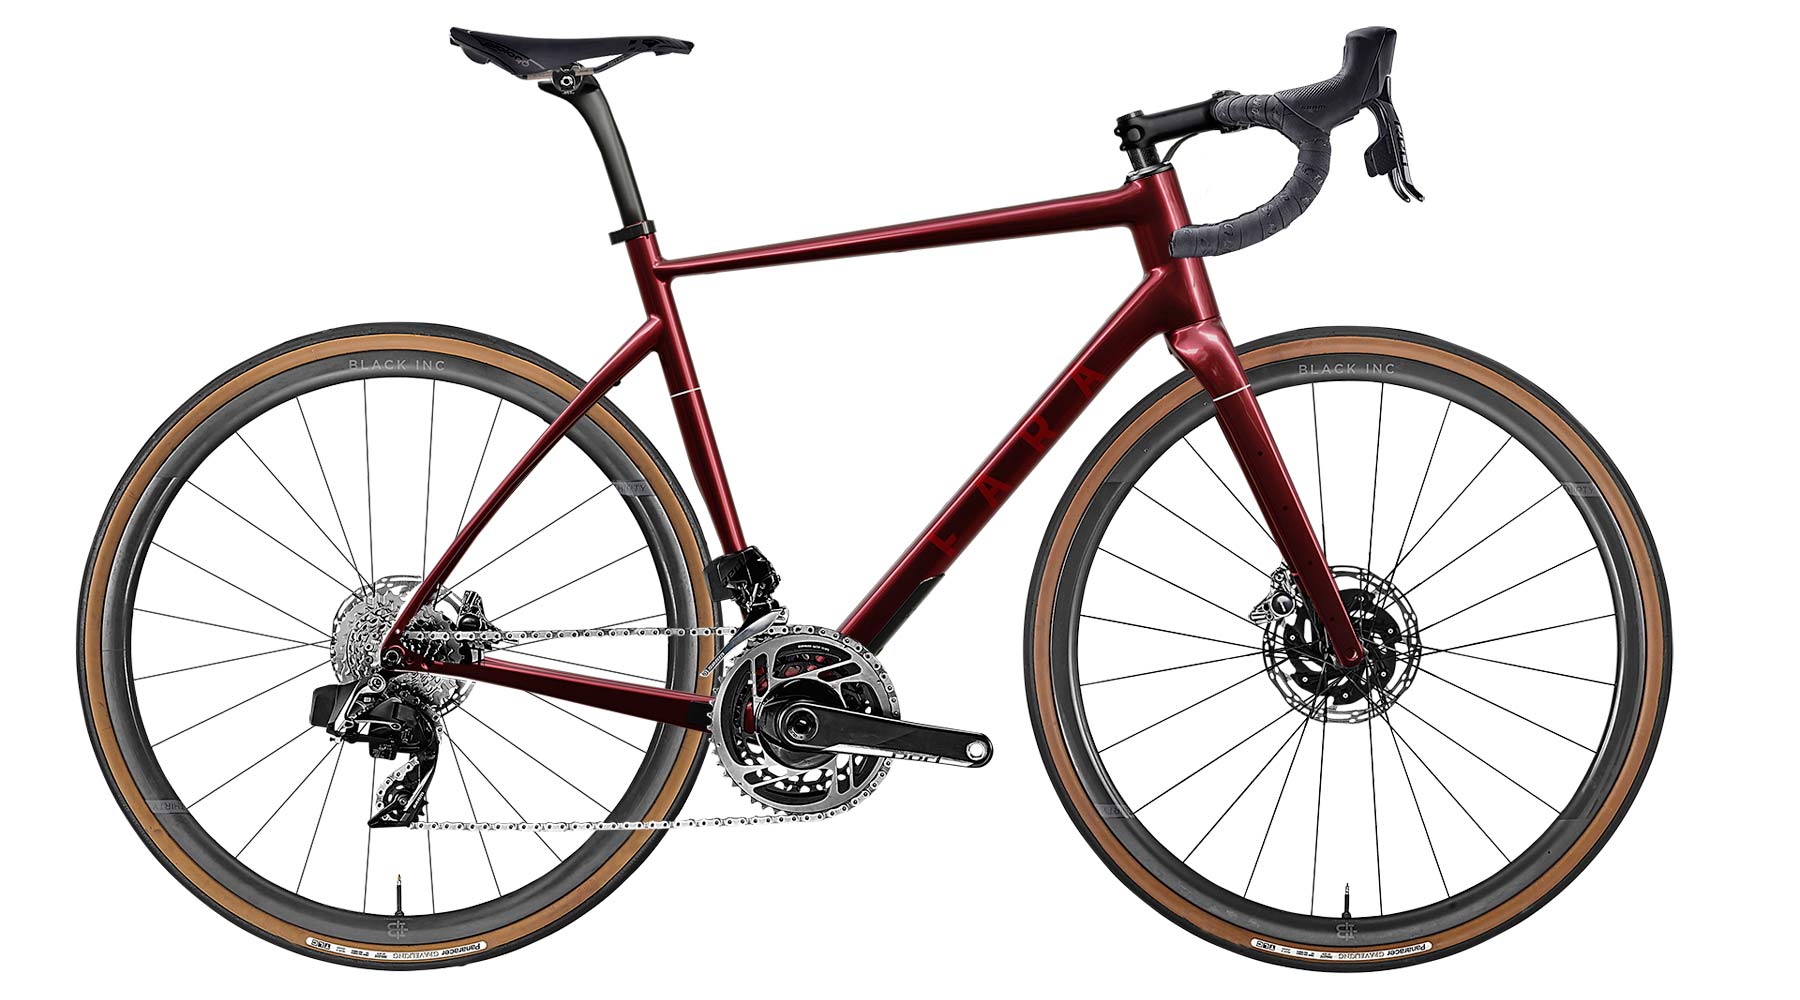 Fara F-AR all-road bike, carbon ultra-endurance all-road and gravel bike with integrated bikepacking bags, Red AXS